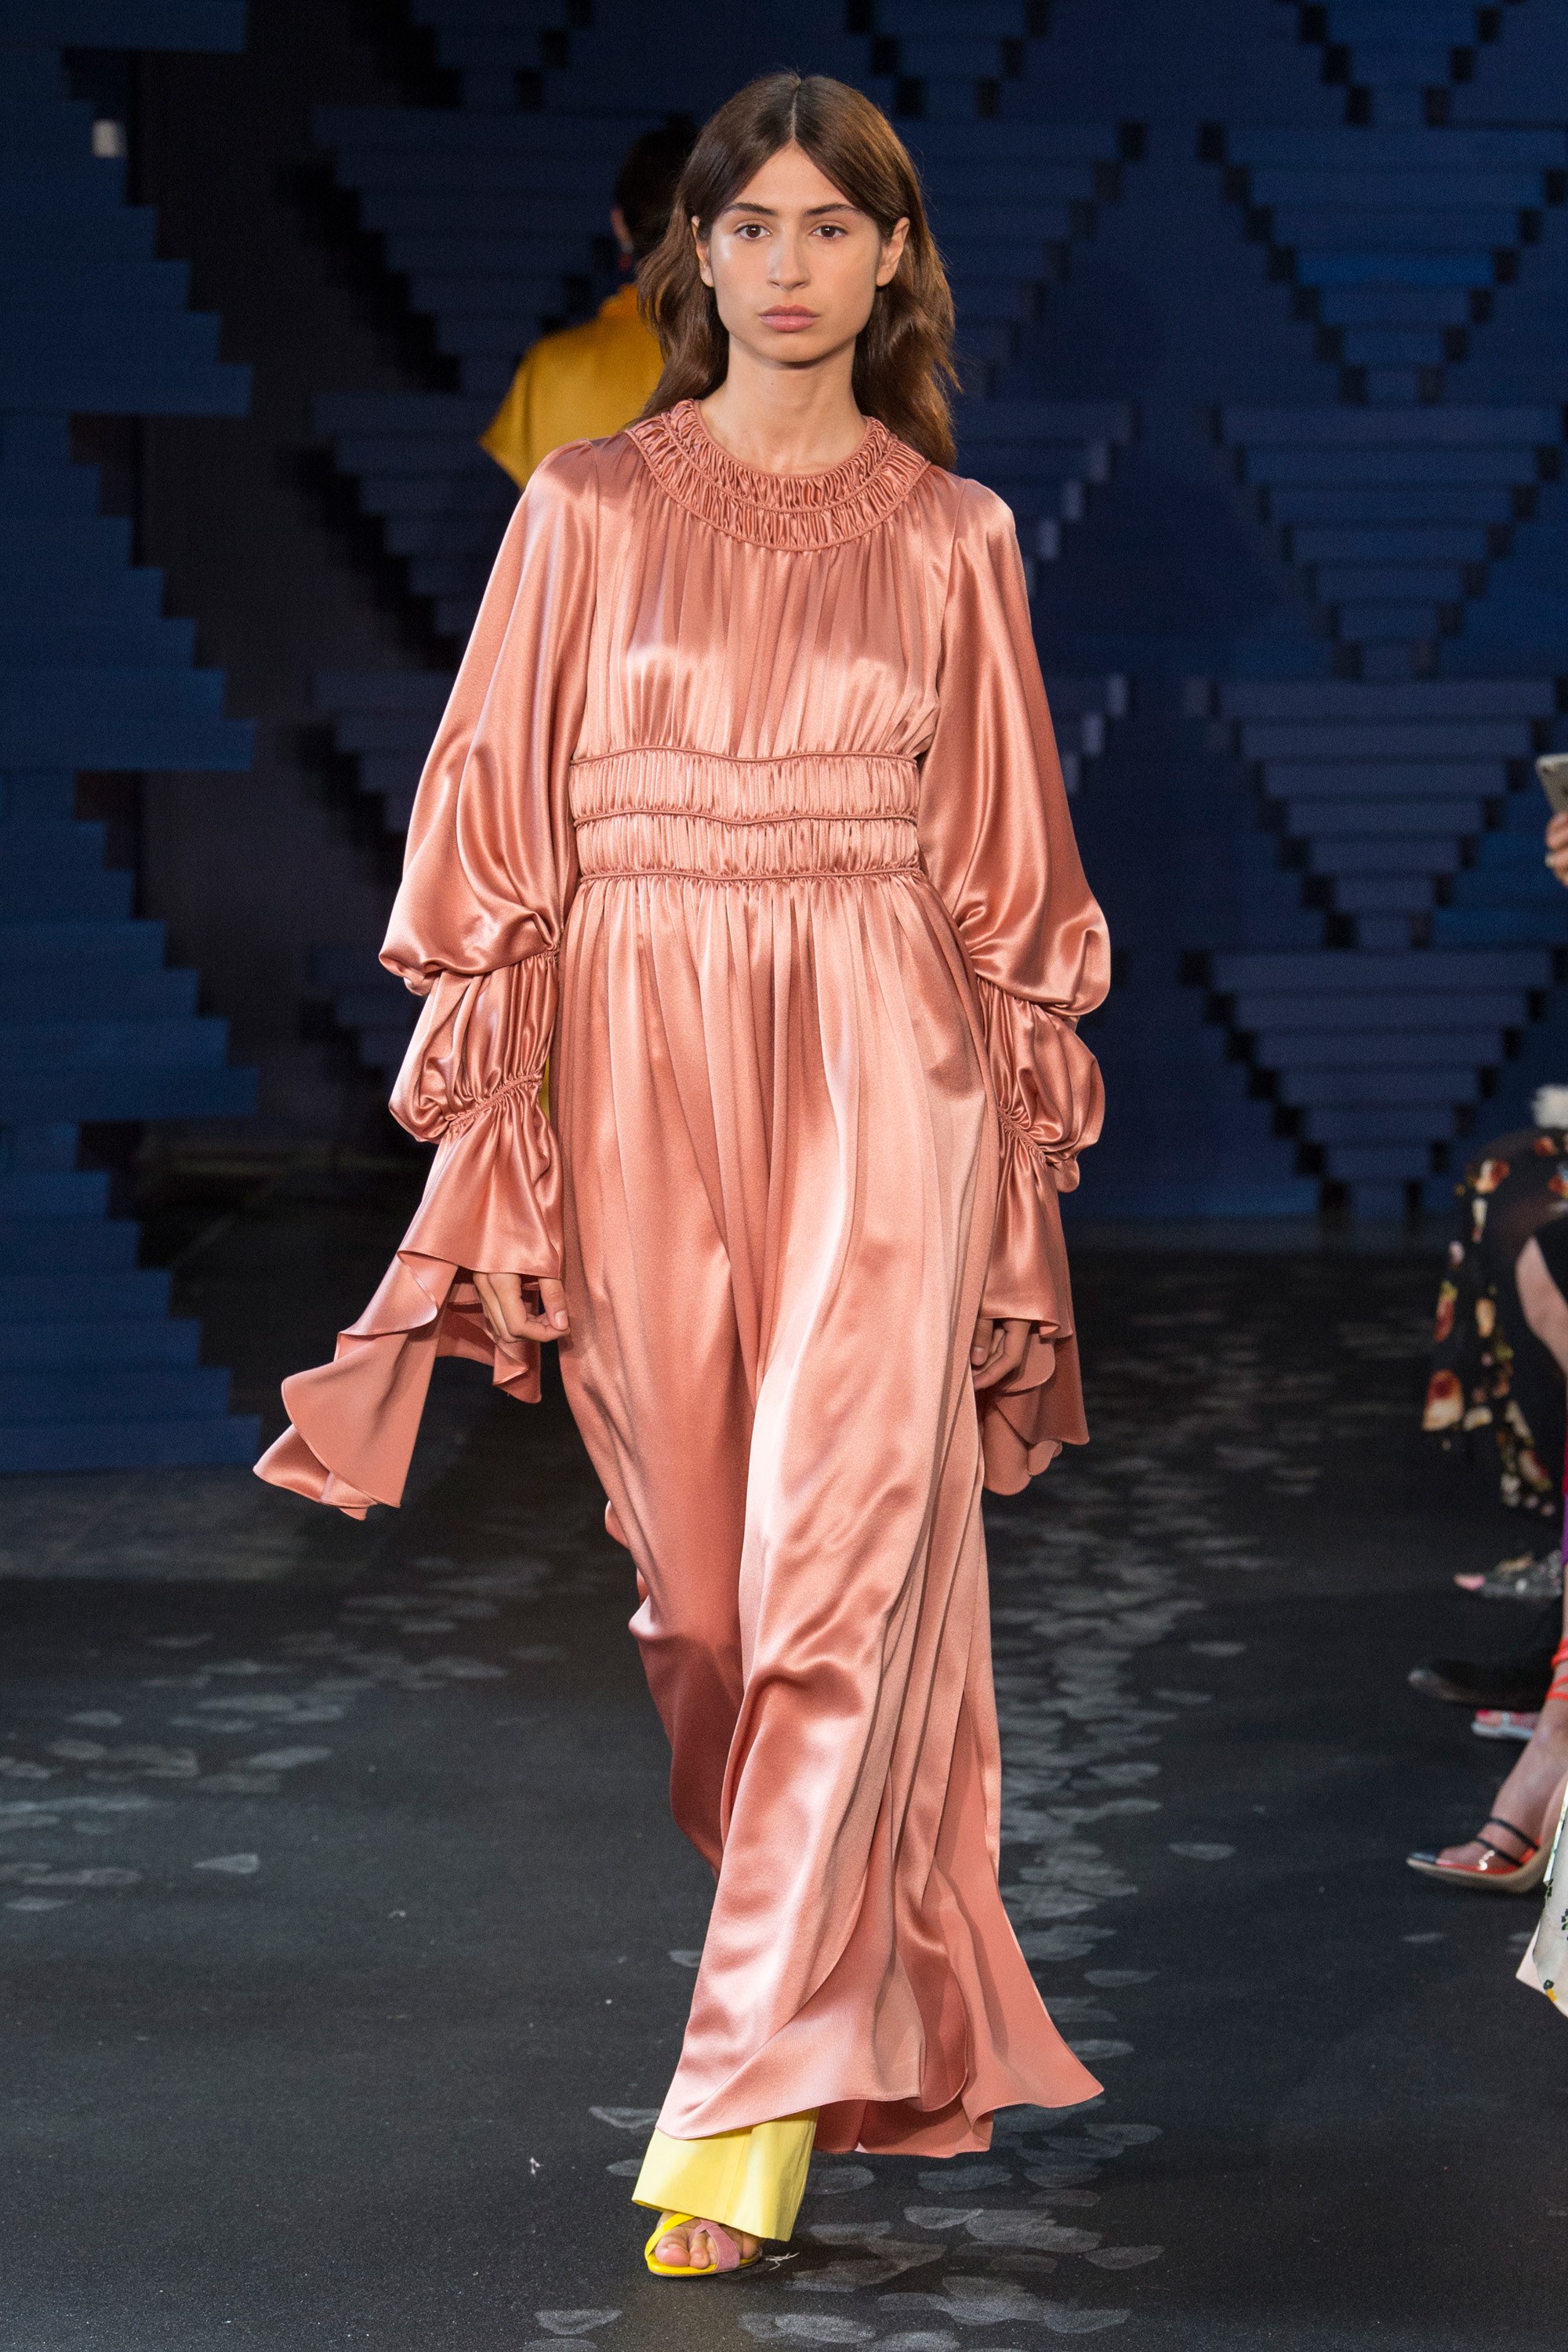 Pink Is Alive Once Again For London Fashion Week | Fashion News ...